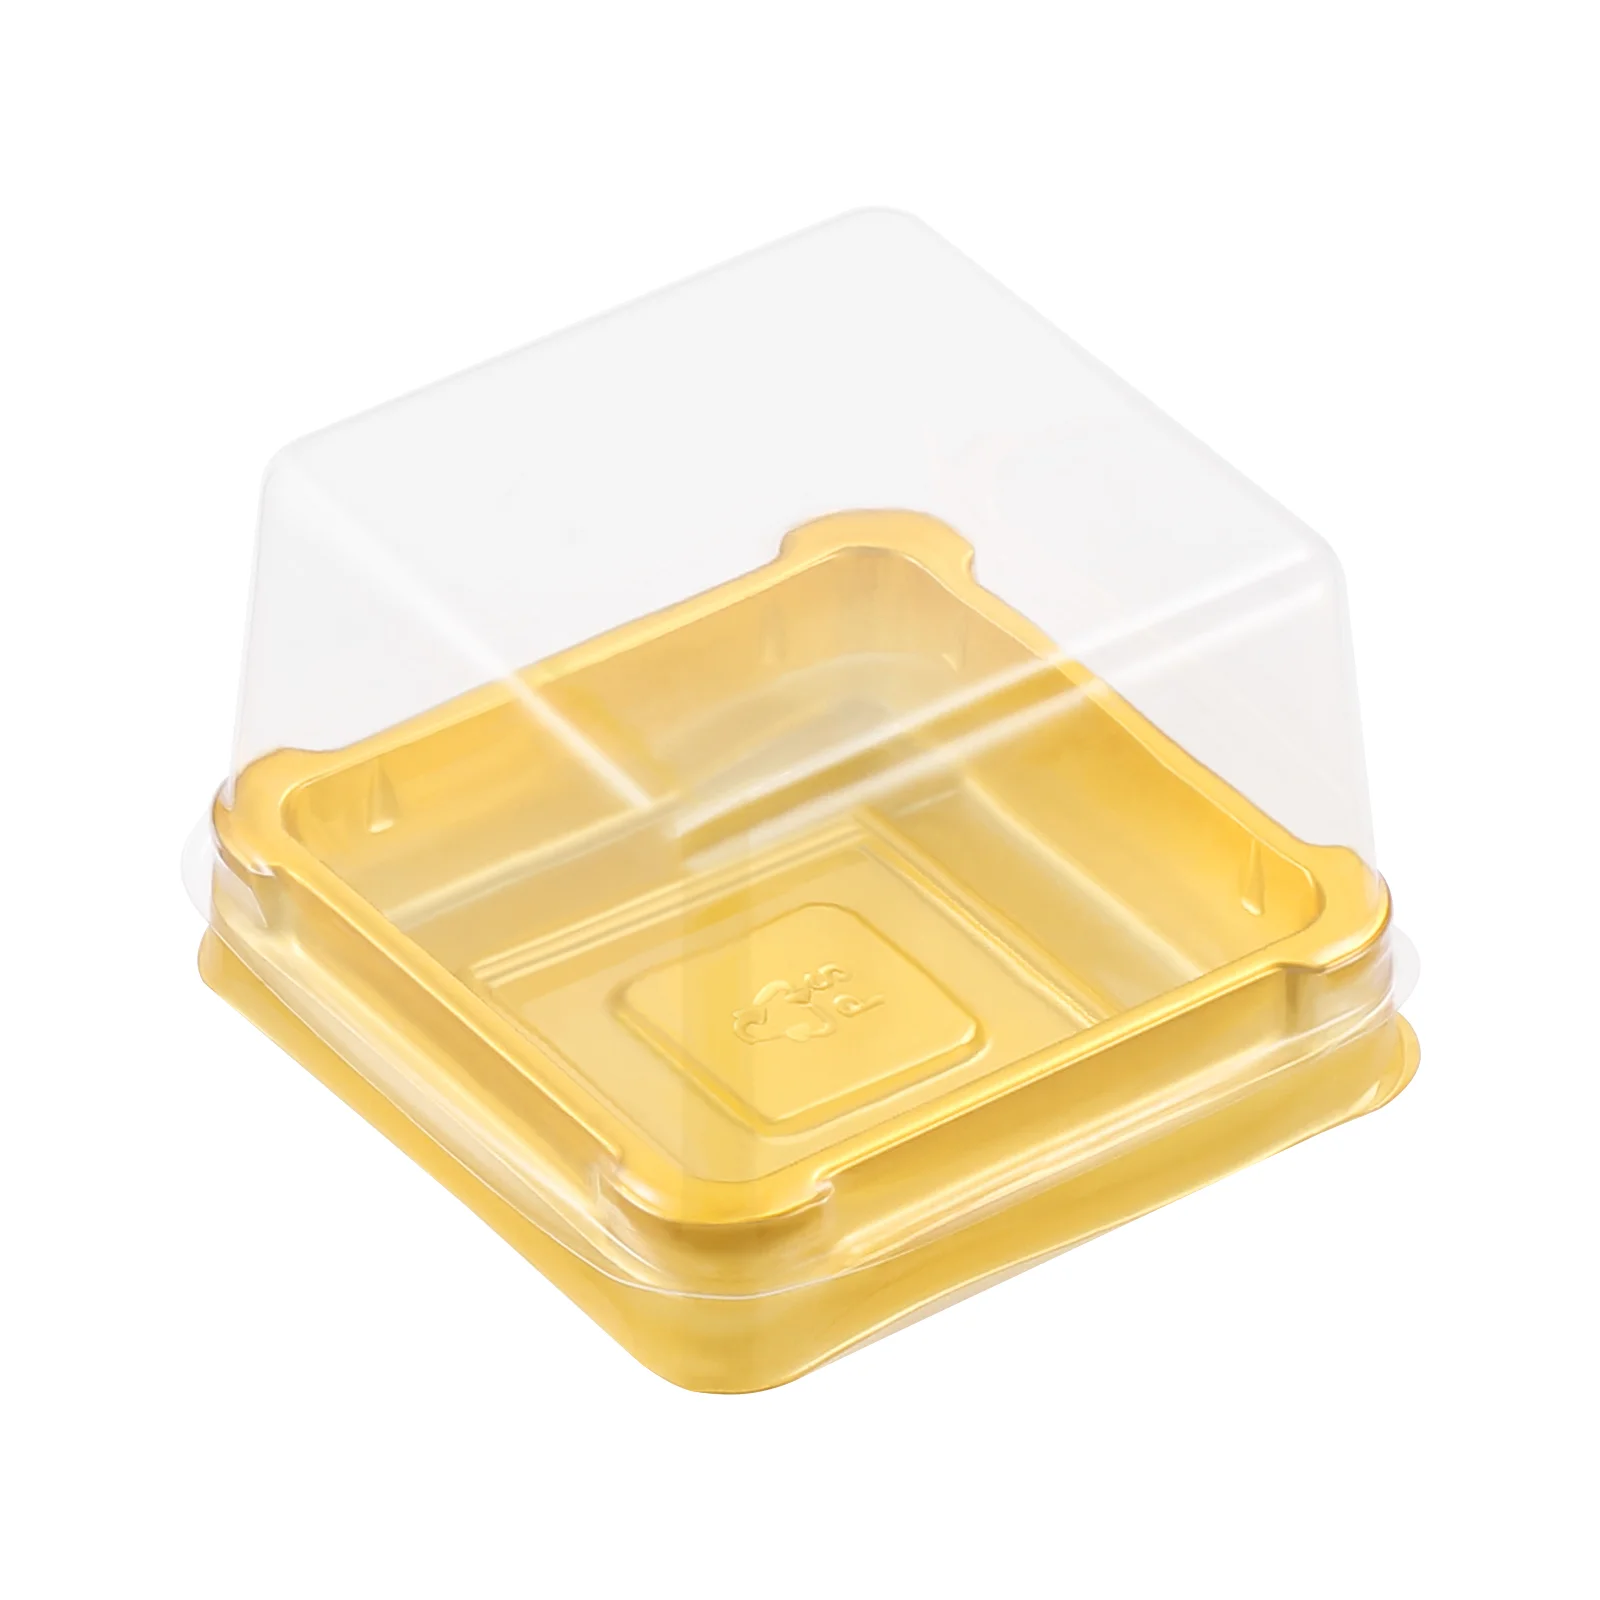 

UPKOCH 50pcs Plastic Square Moon Cake Boxes Egg-Yolk Puff Container Golden Packing Box (Small)